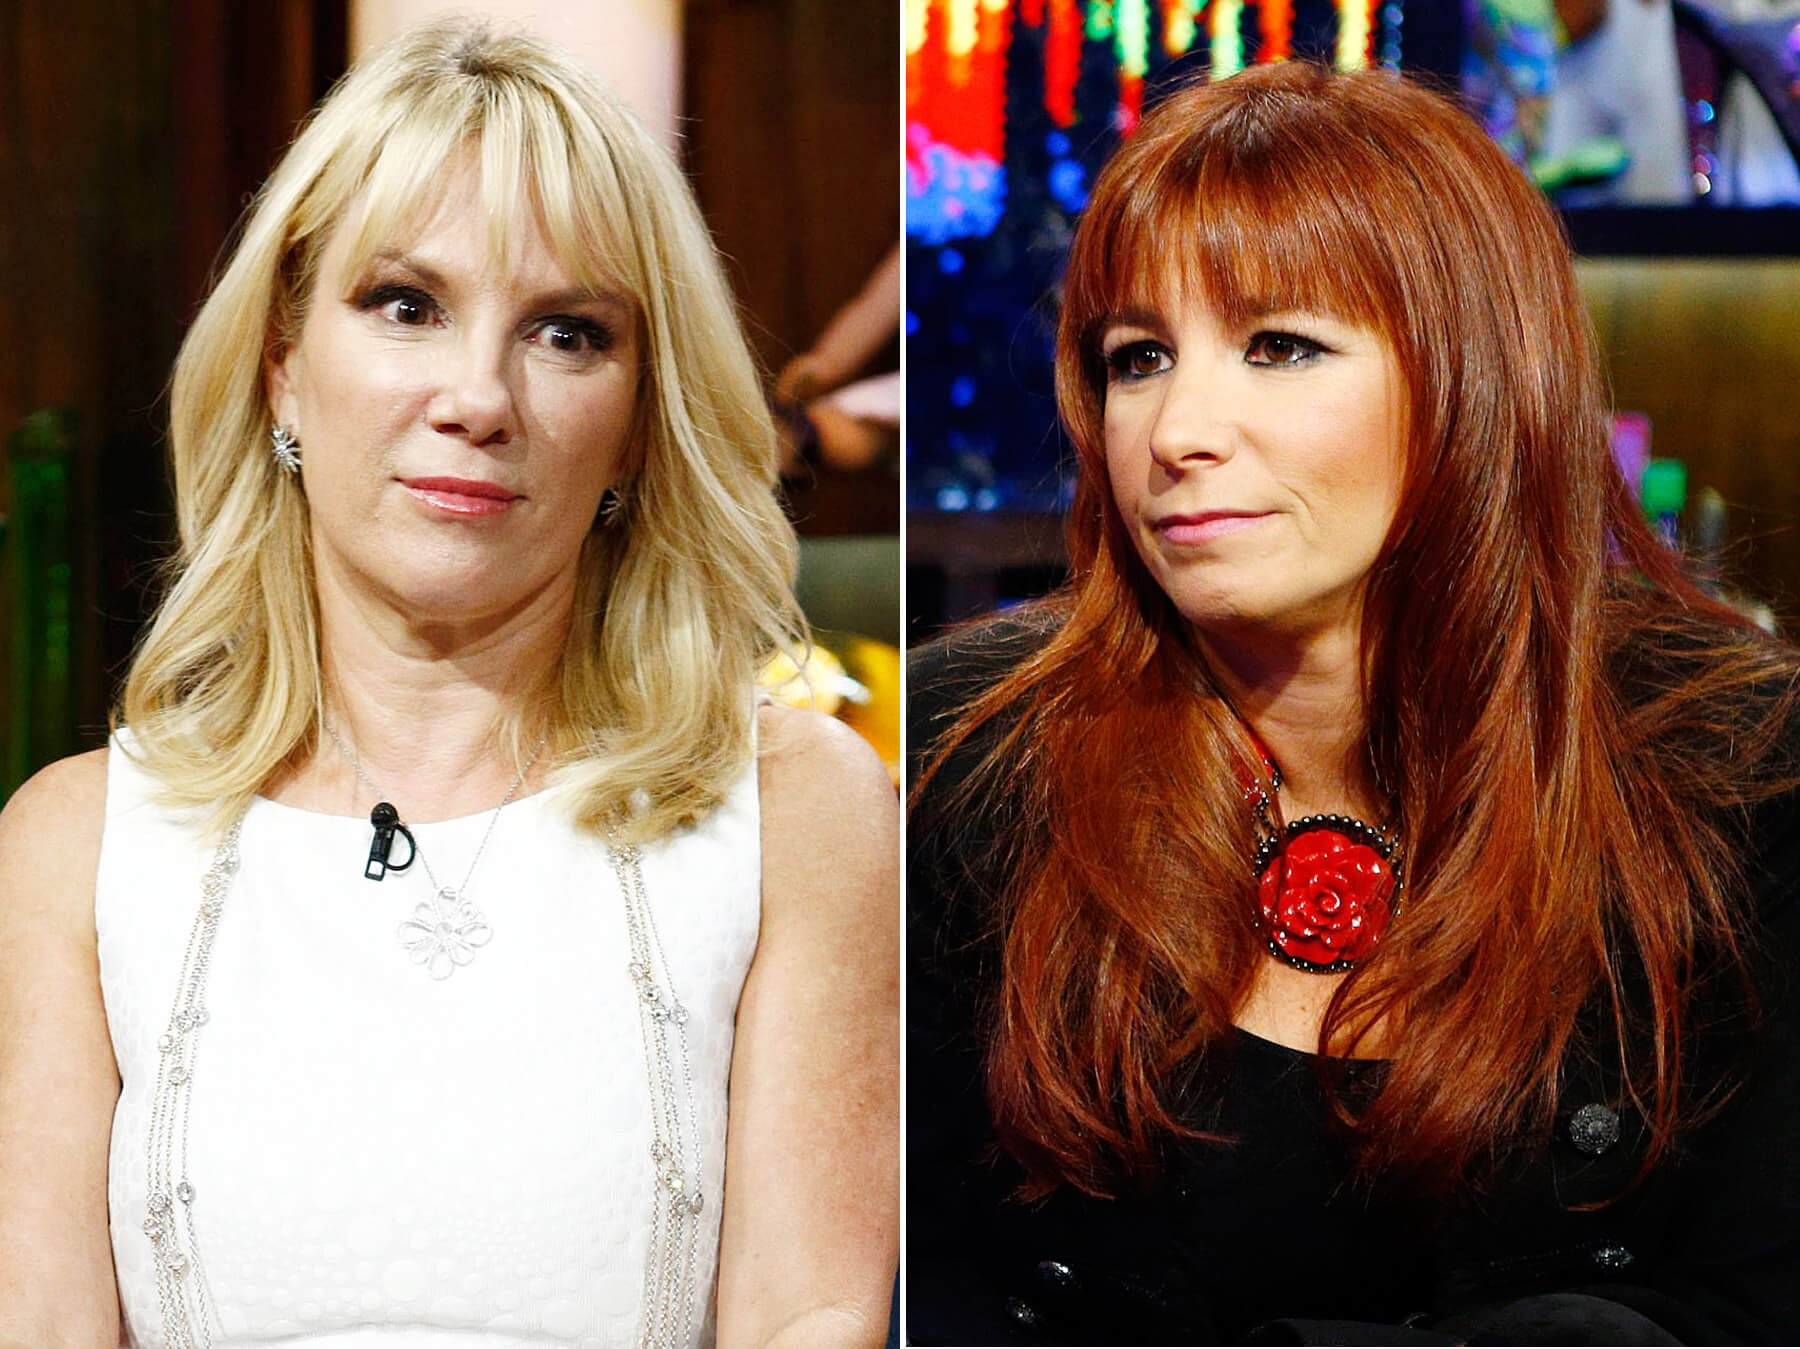 Ramona Singer Made Jill Zarin Cry During Mean Interaction in London!